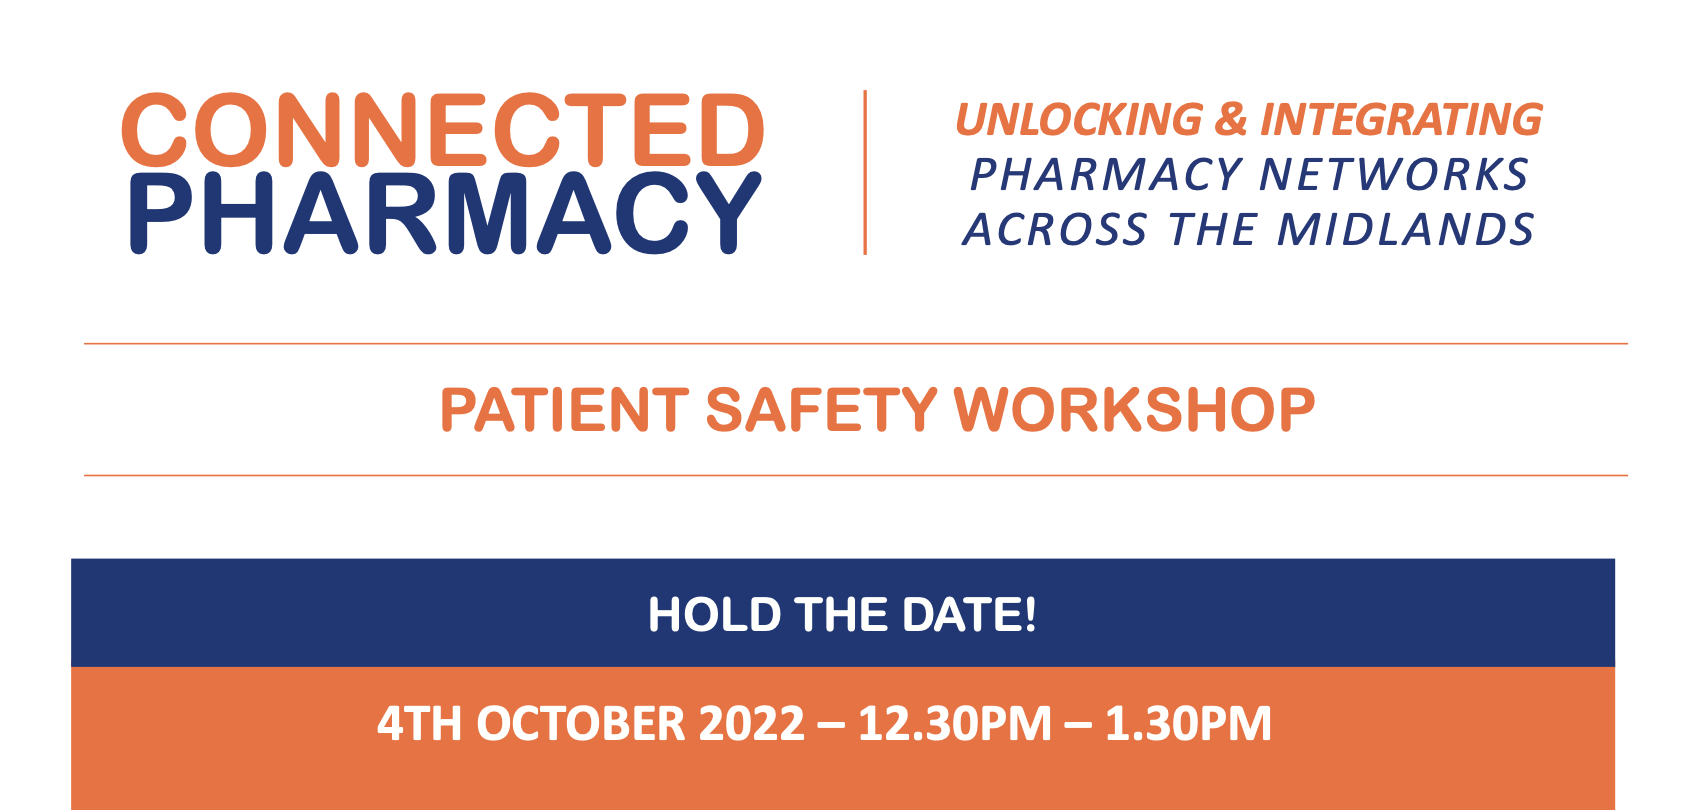 Connected Pharmacy Workshop